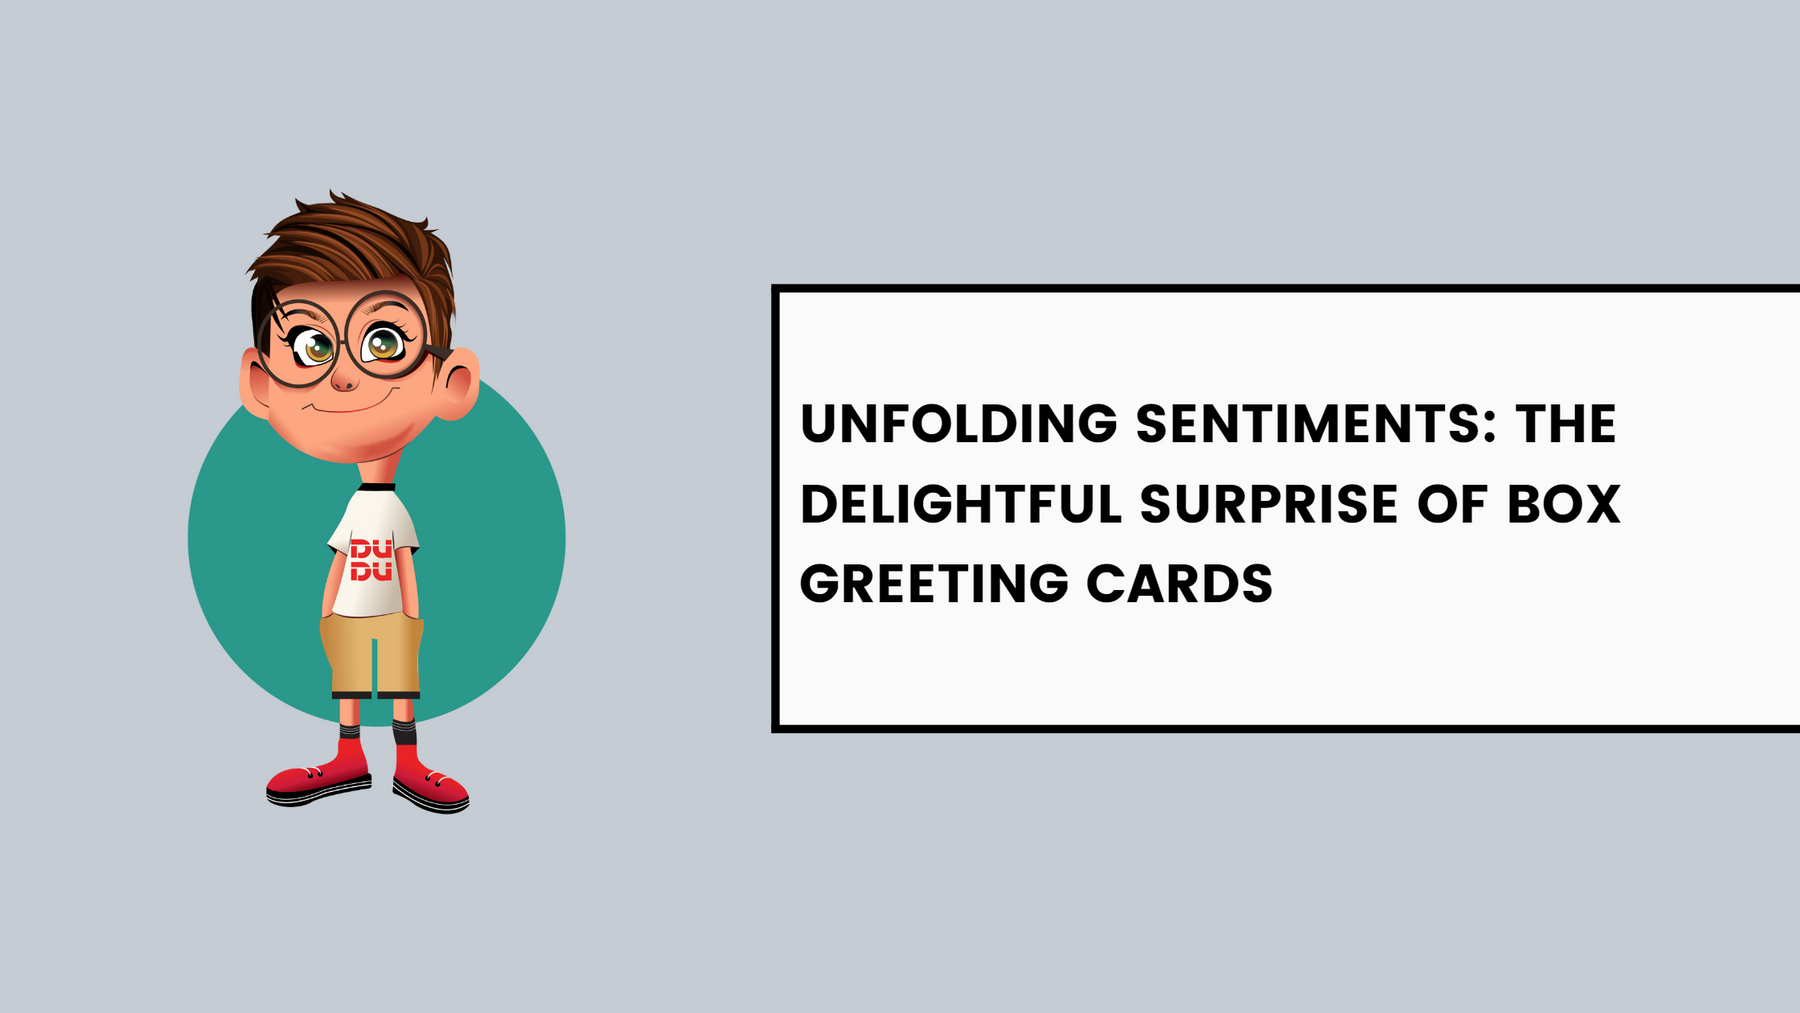 Unfolding Sentiments: The Delightful Surprise of Box Greeting Cards